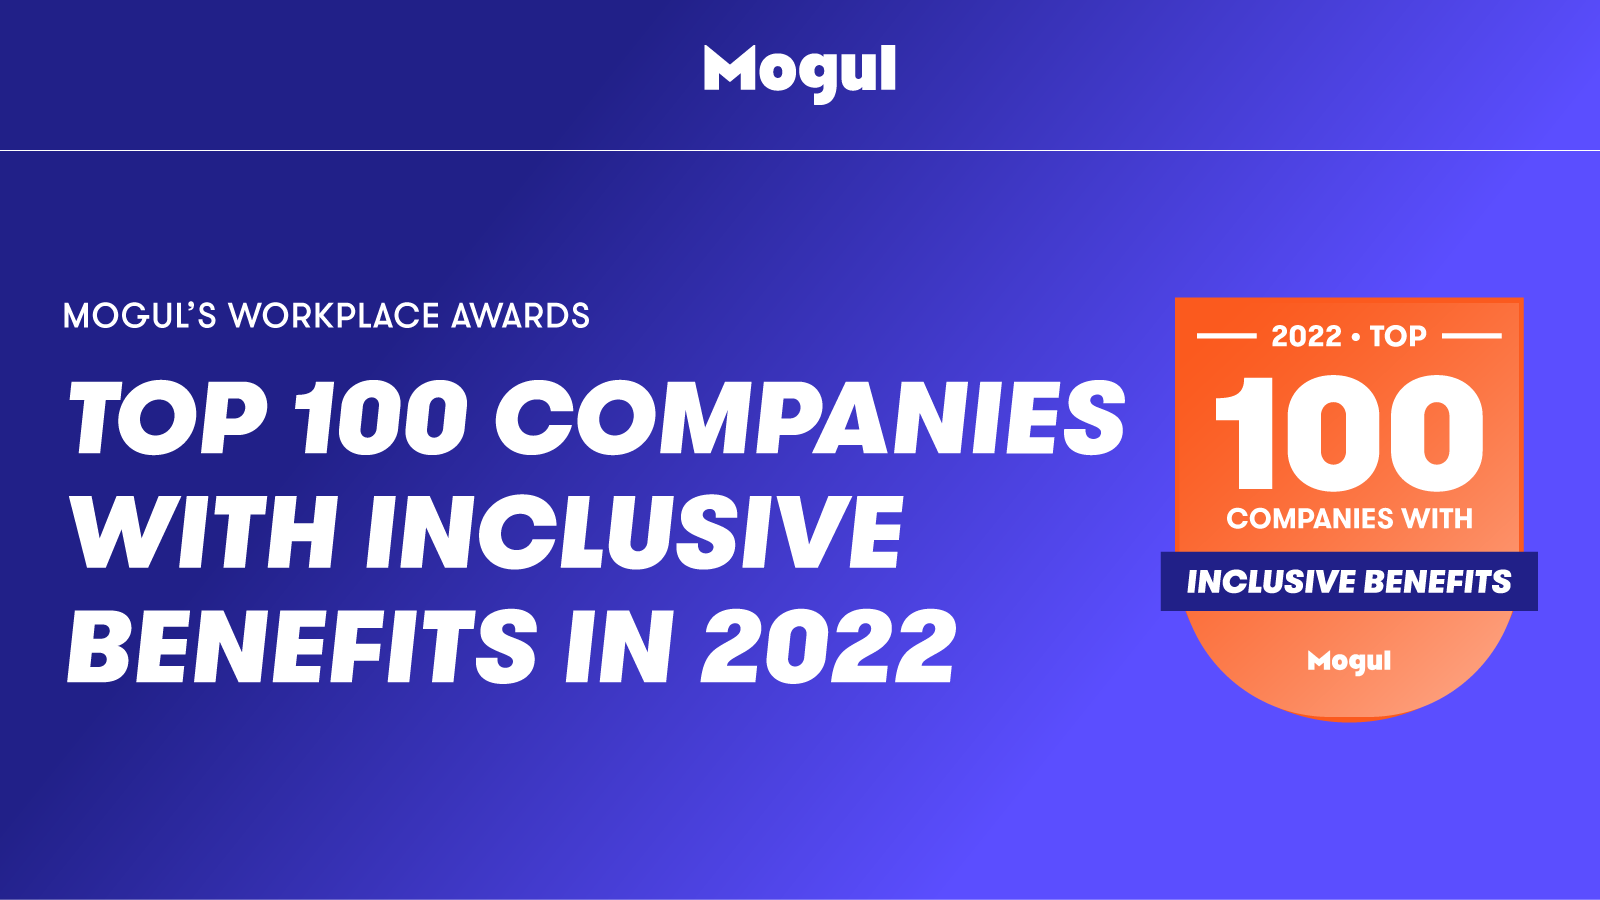 Top 100 Companies With Inclusive Benefits in 2022